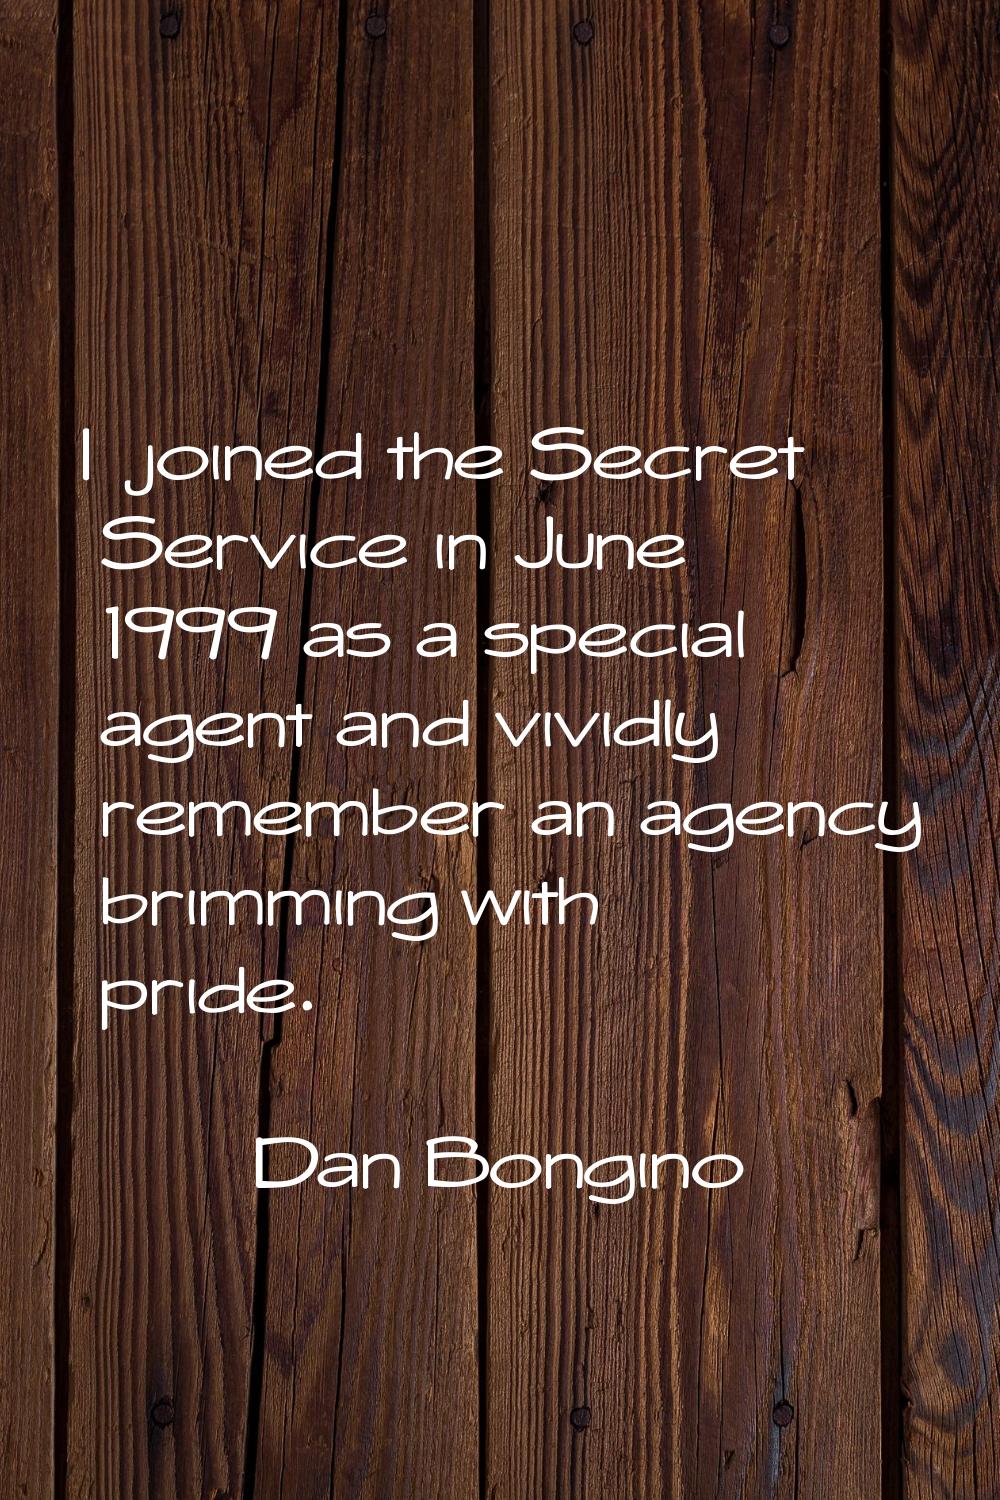 I joined the Secret Service in June 1999 as a special agent and vividly remember an agency brimming